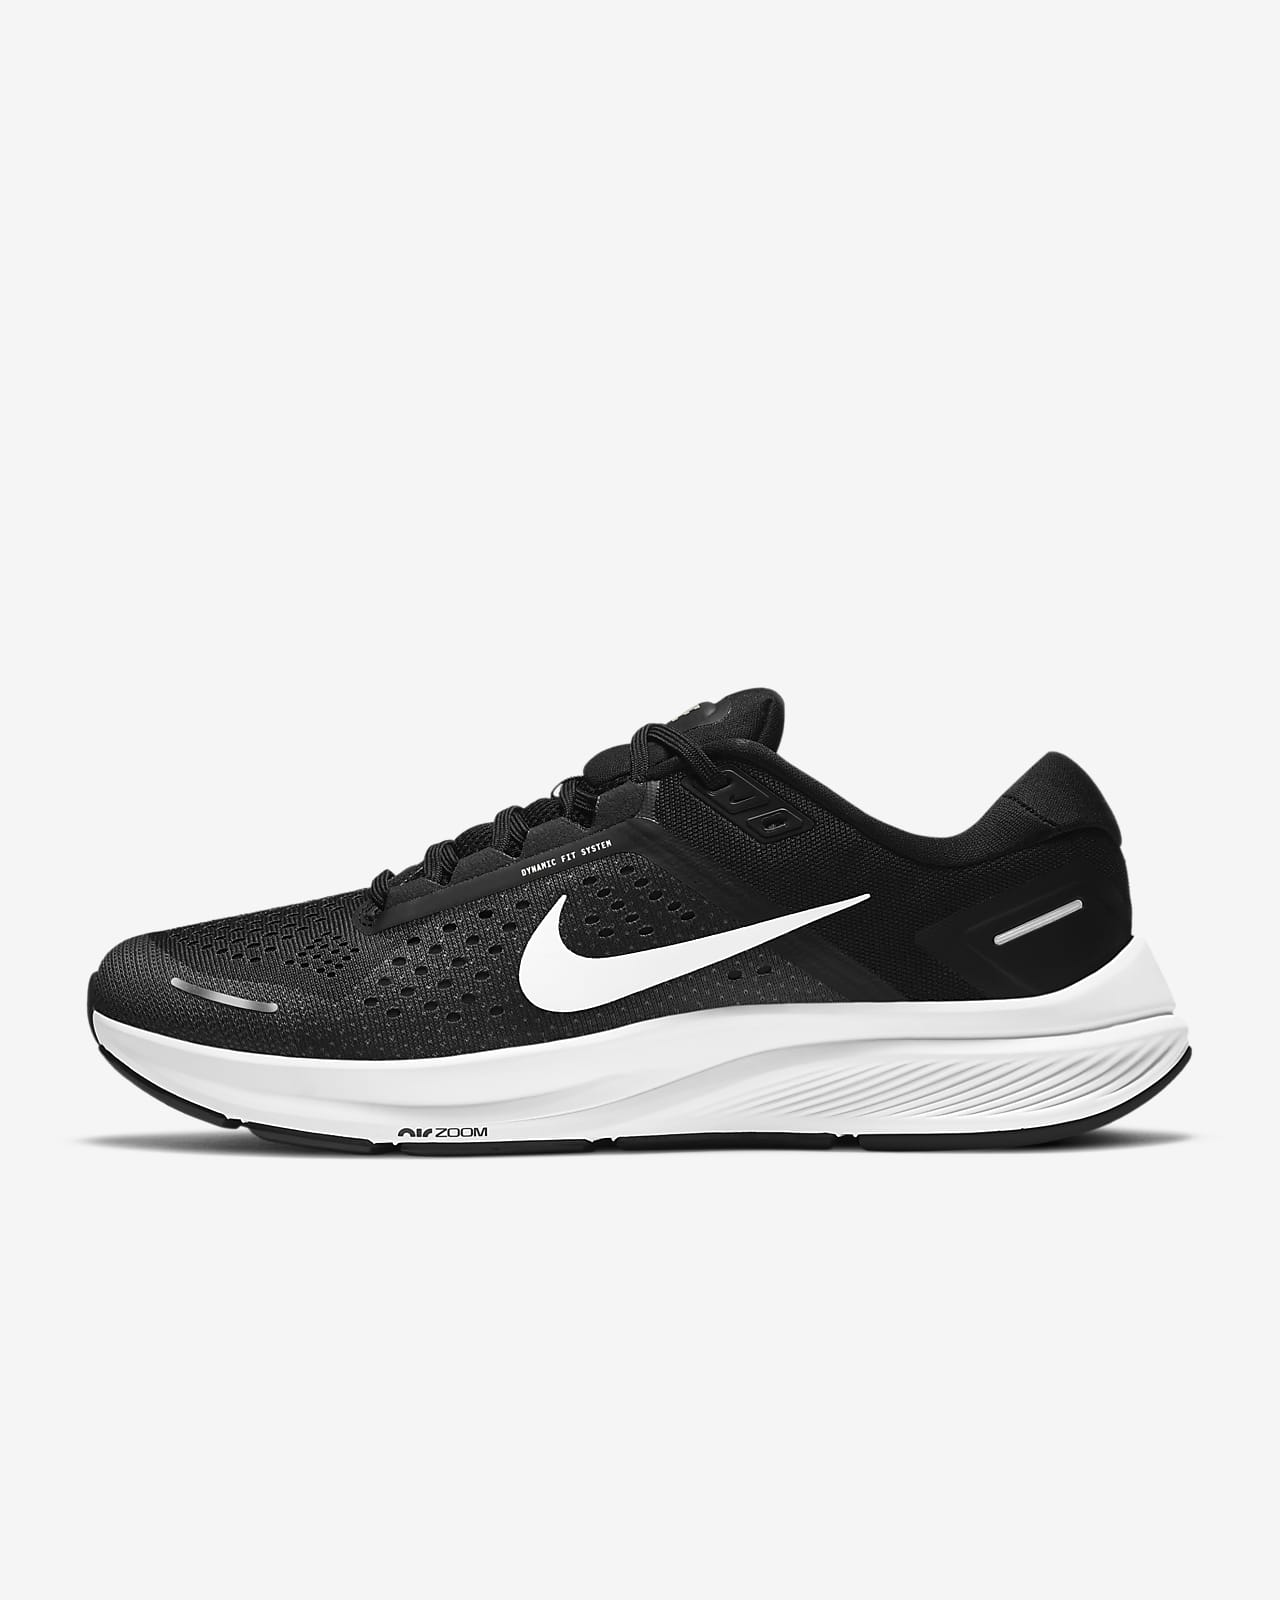 Immersion barn a few Nike Air Zoom Structure 23 Men's Road Running Shoes. Nike LU